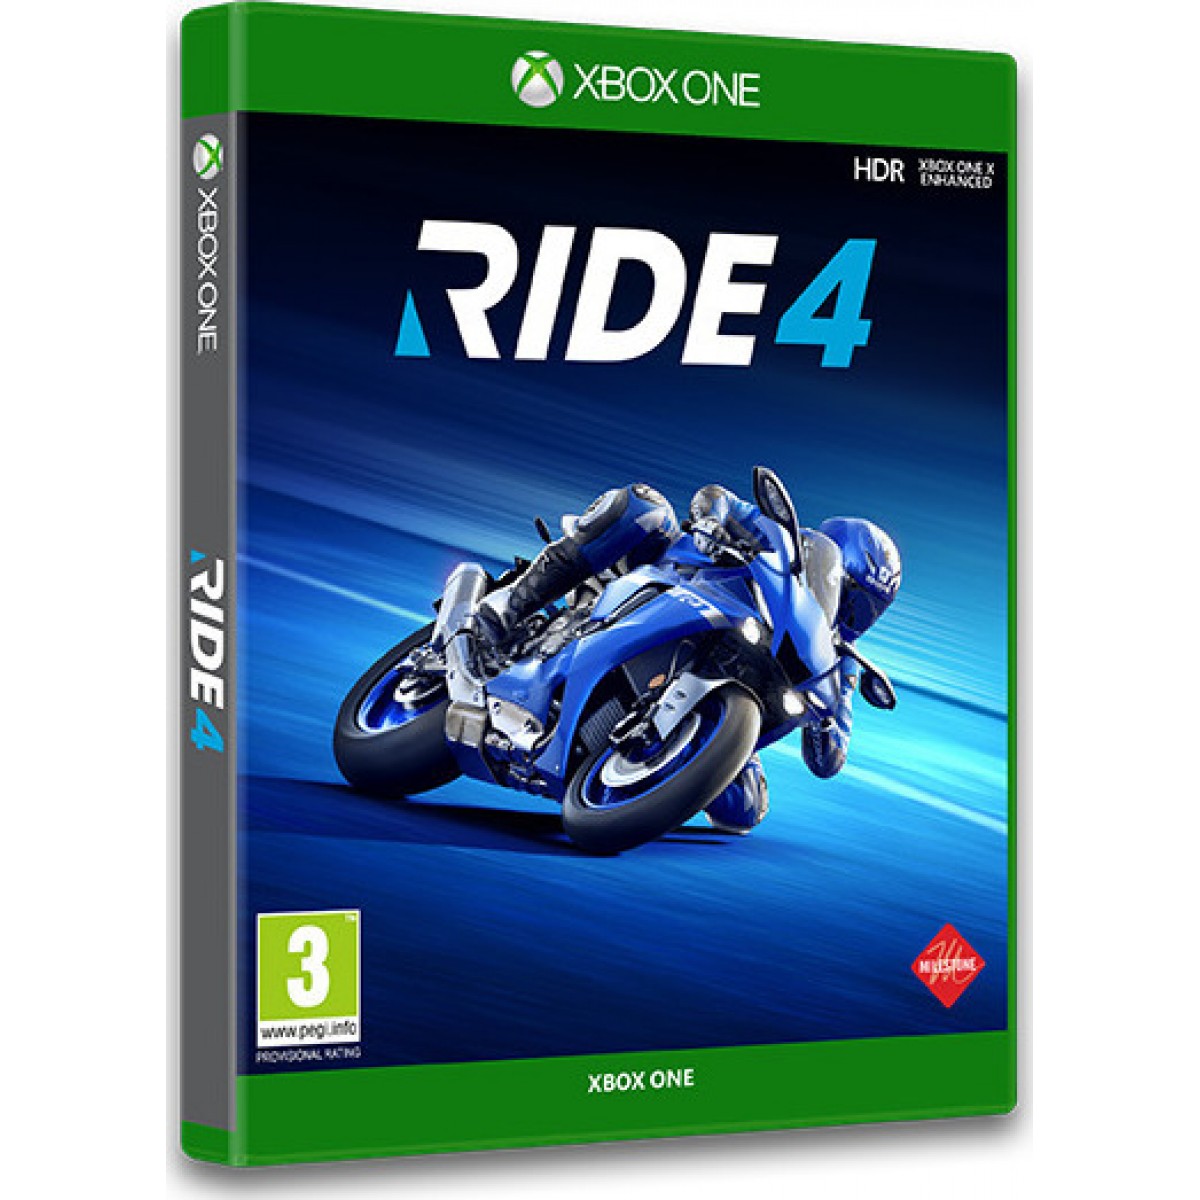 XBOX ONE / SERIES X RIDE 4 GAME